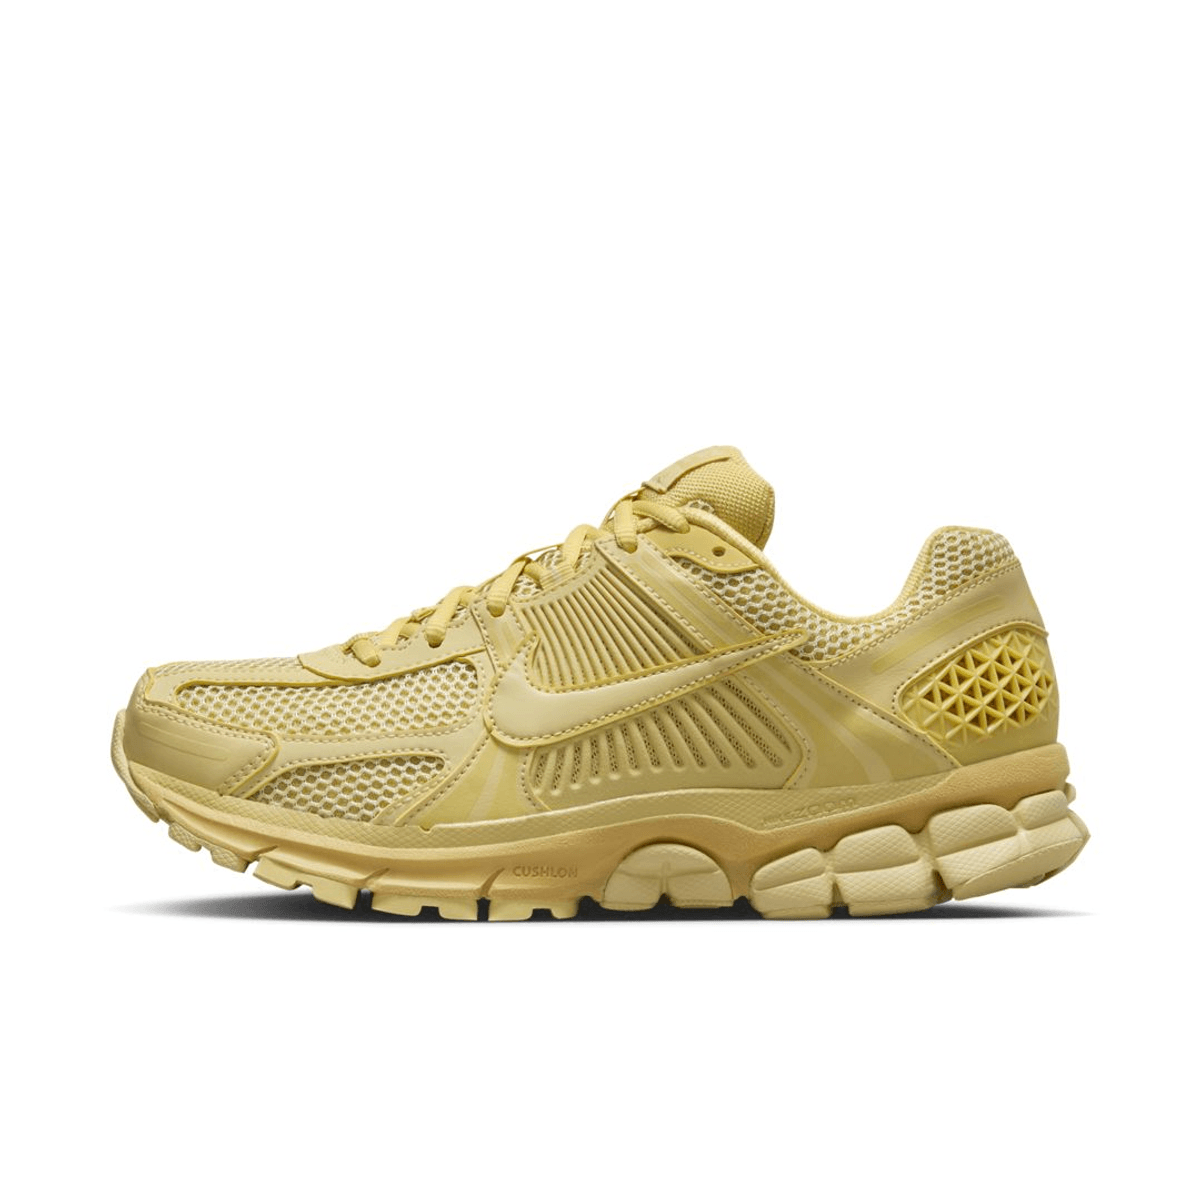 Official Look At The Nike Zoom Vomero 5 "Saturn Gold"